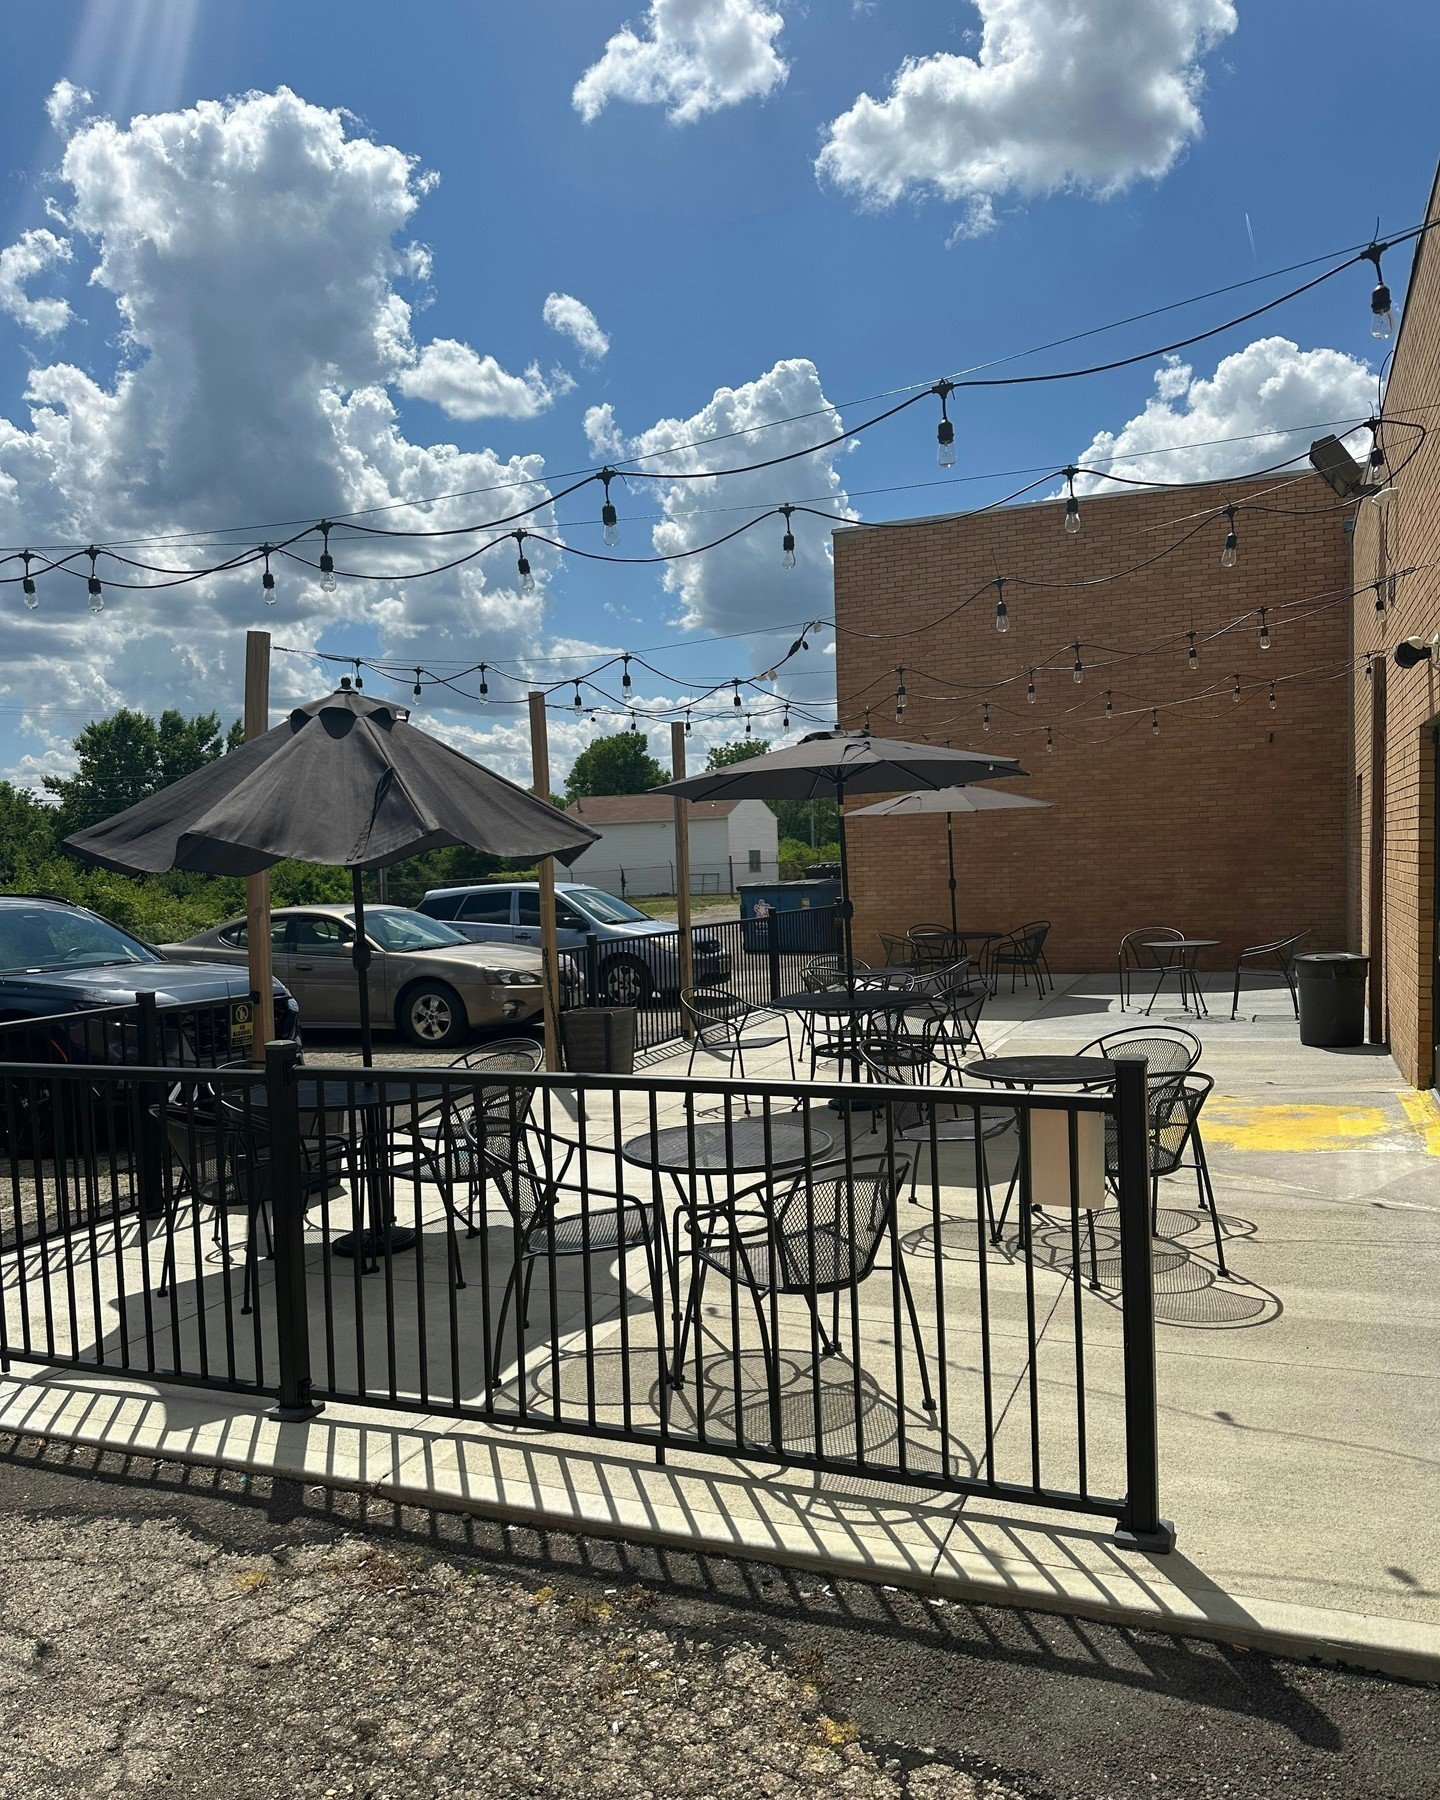 Patio SZN ☀️
Sip, savor, and soak up the sunshine. Whether it's a refreshing pint, a gourmet burger, or just good vibes you're after, our patio is the place to be. Grab a seat, relax, and let the outdoor escapades begin.

🐶 Pups are welcome on the p